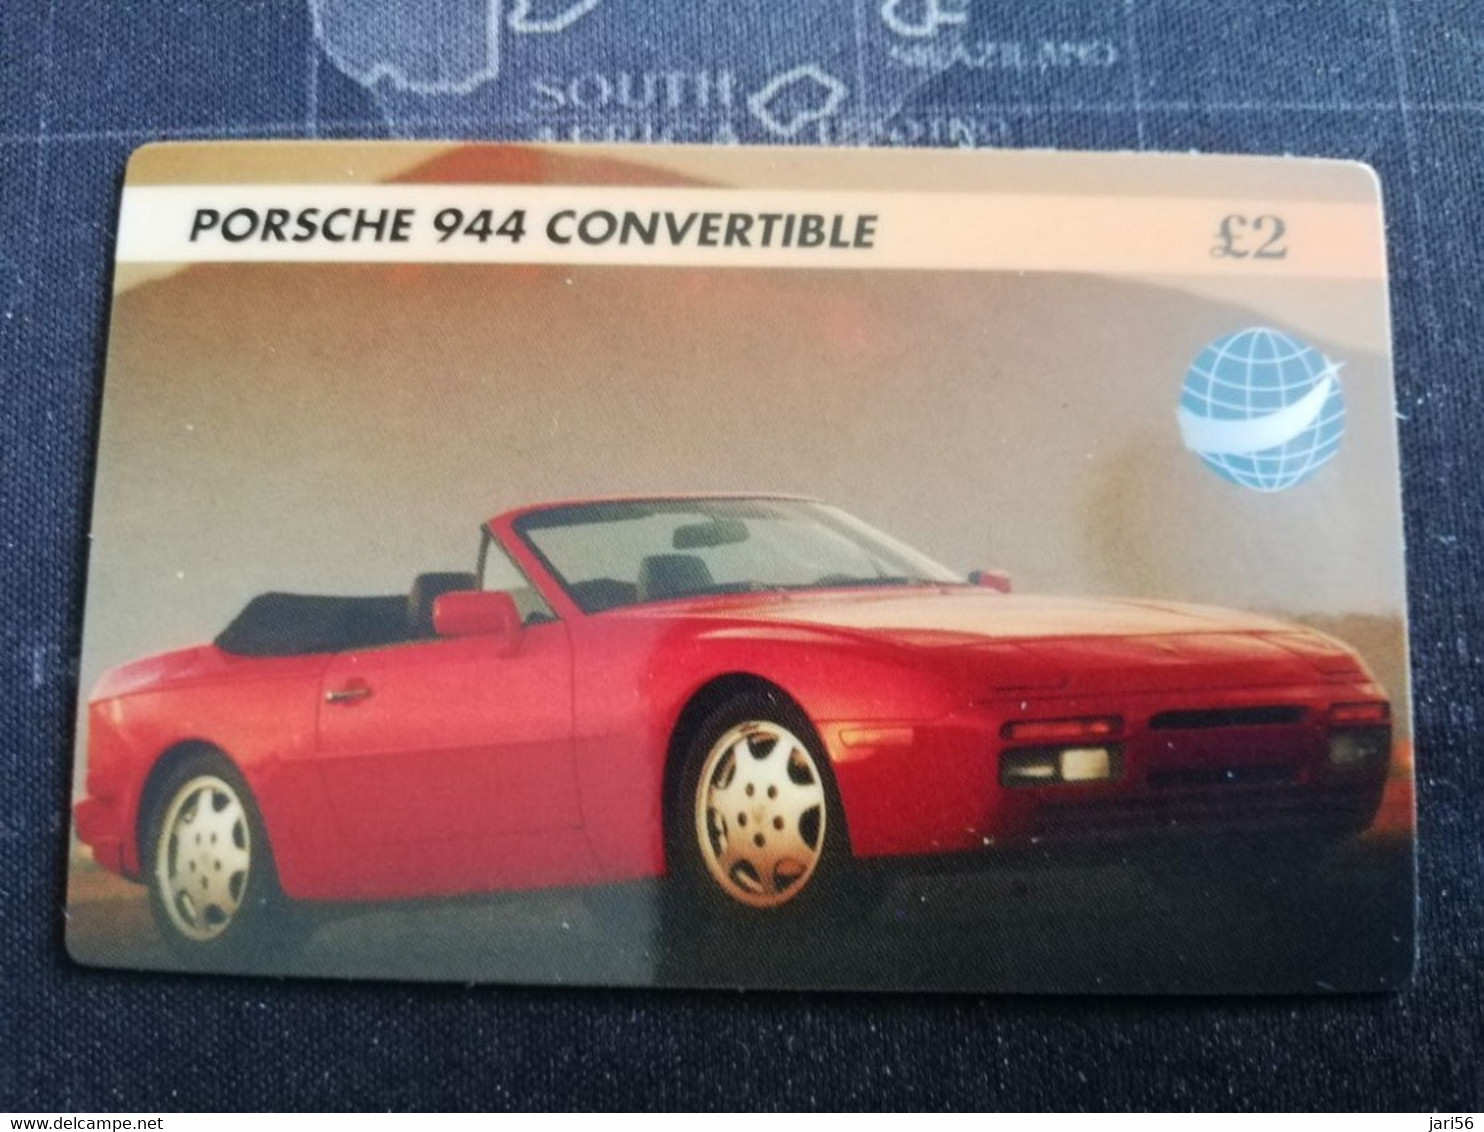 GREAT BRITAIN   2 POUND  PORSCHE 944 CONVERTIBLE    AUTOMOBILES/RACING CARS /SPORT CARS  PREPAID      **3260** - Collections